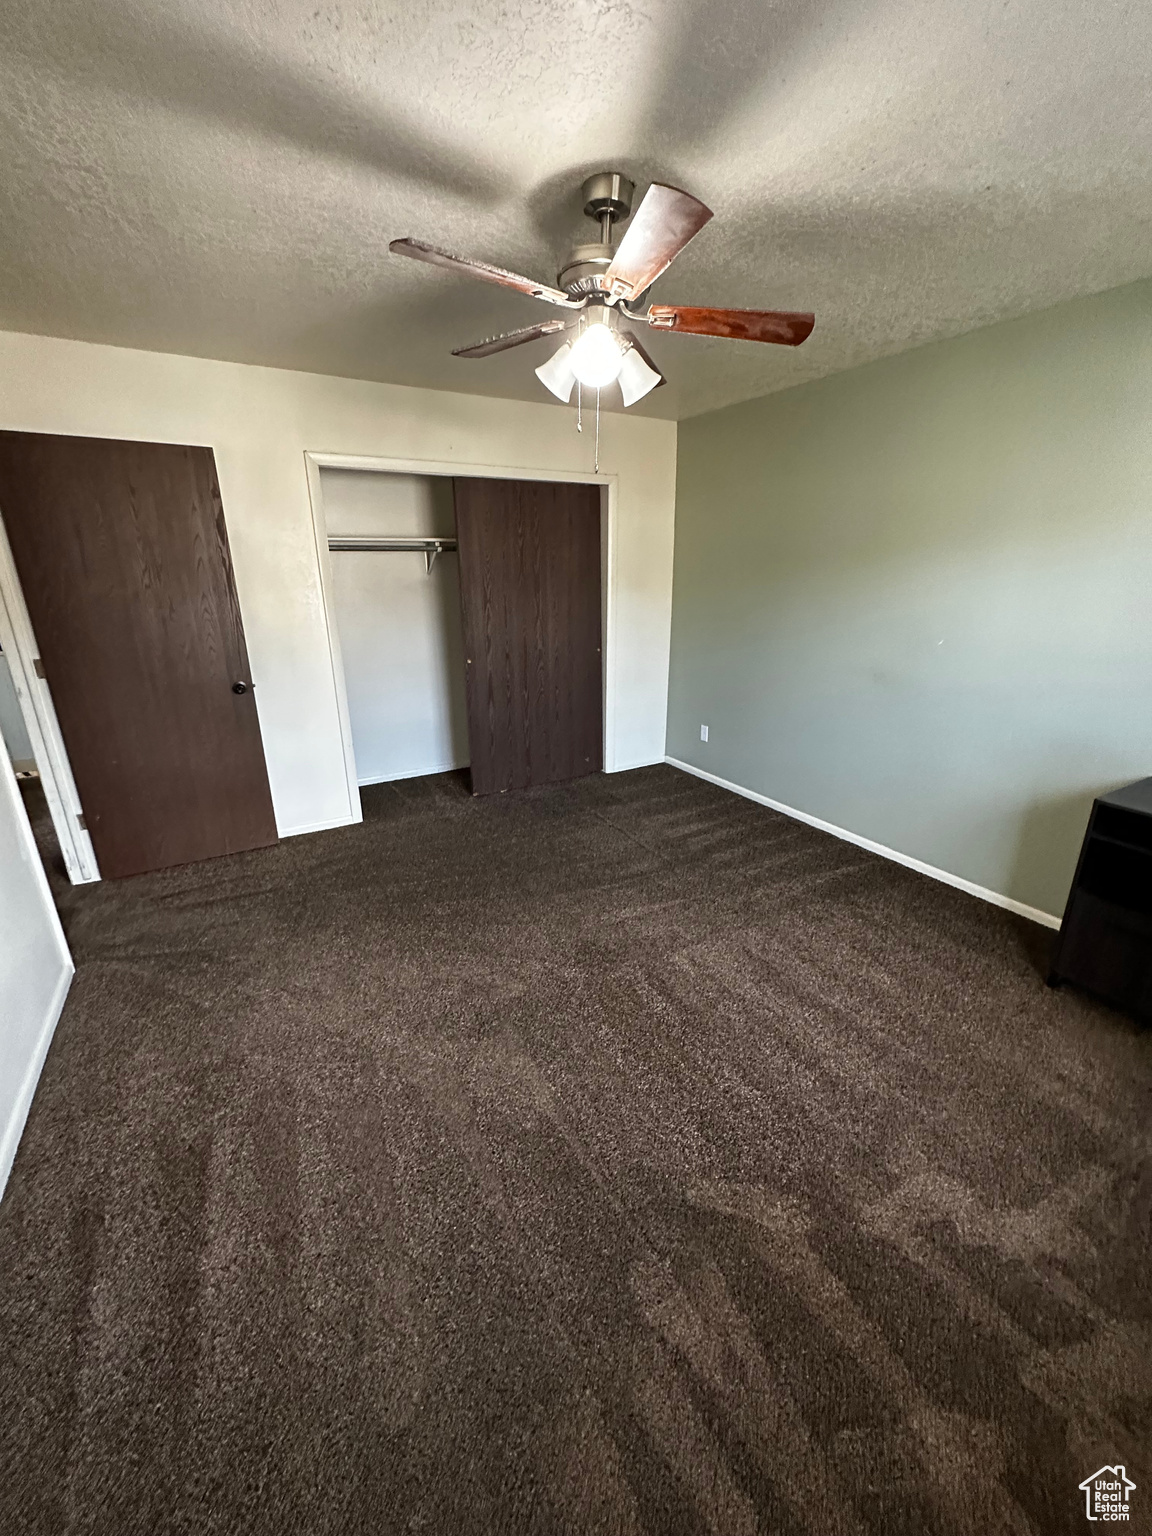 Unfurnished bedroom with a textured ceiling, dark colored carpet, and ceiling fan